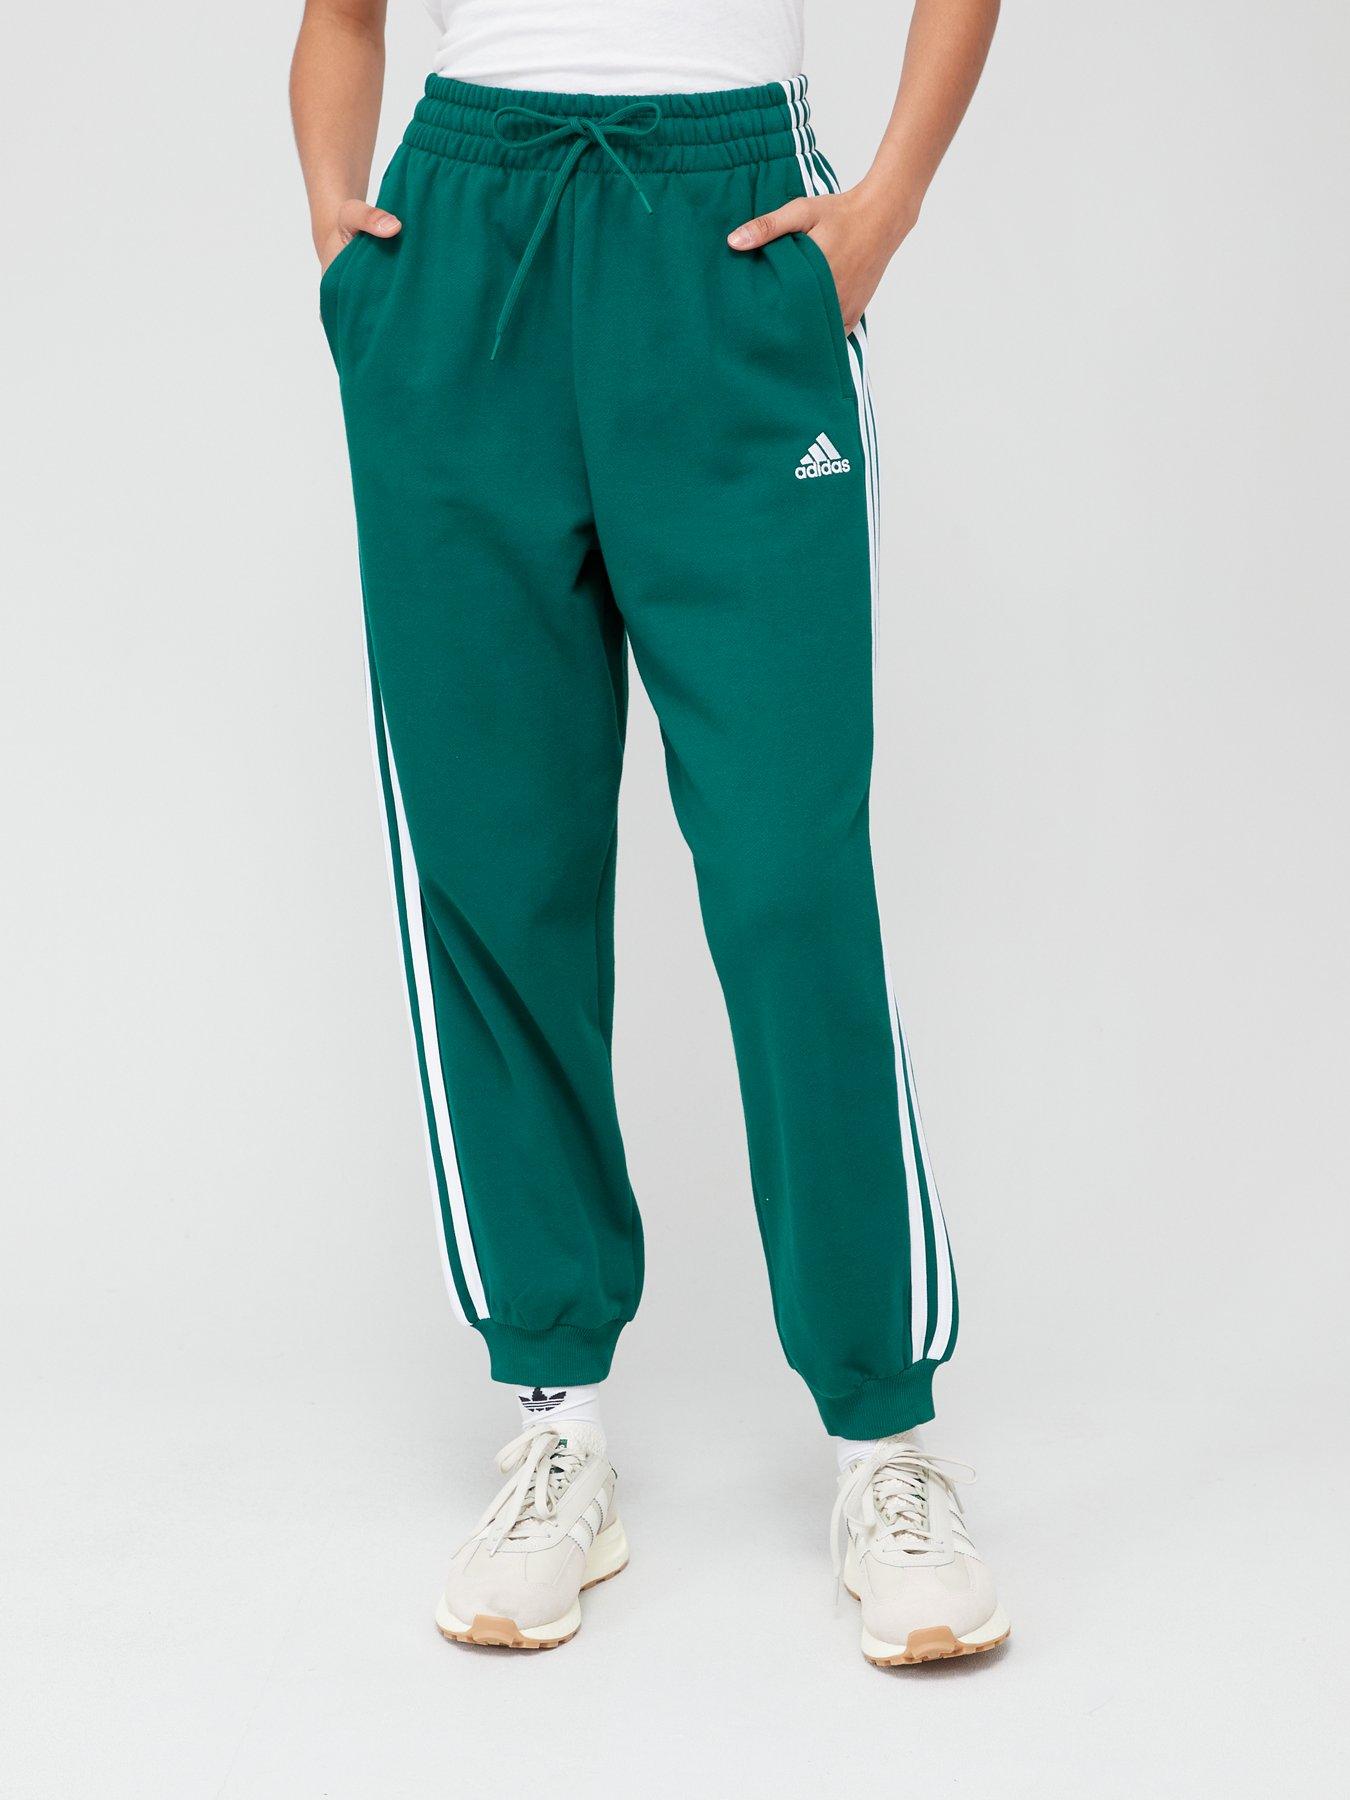 Adidas Sst Track pants, Men's Fashion, Bottoms, Joggers on Carousell